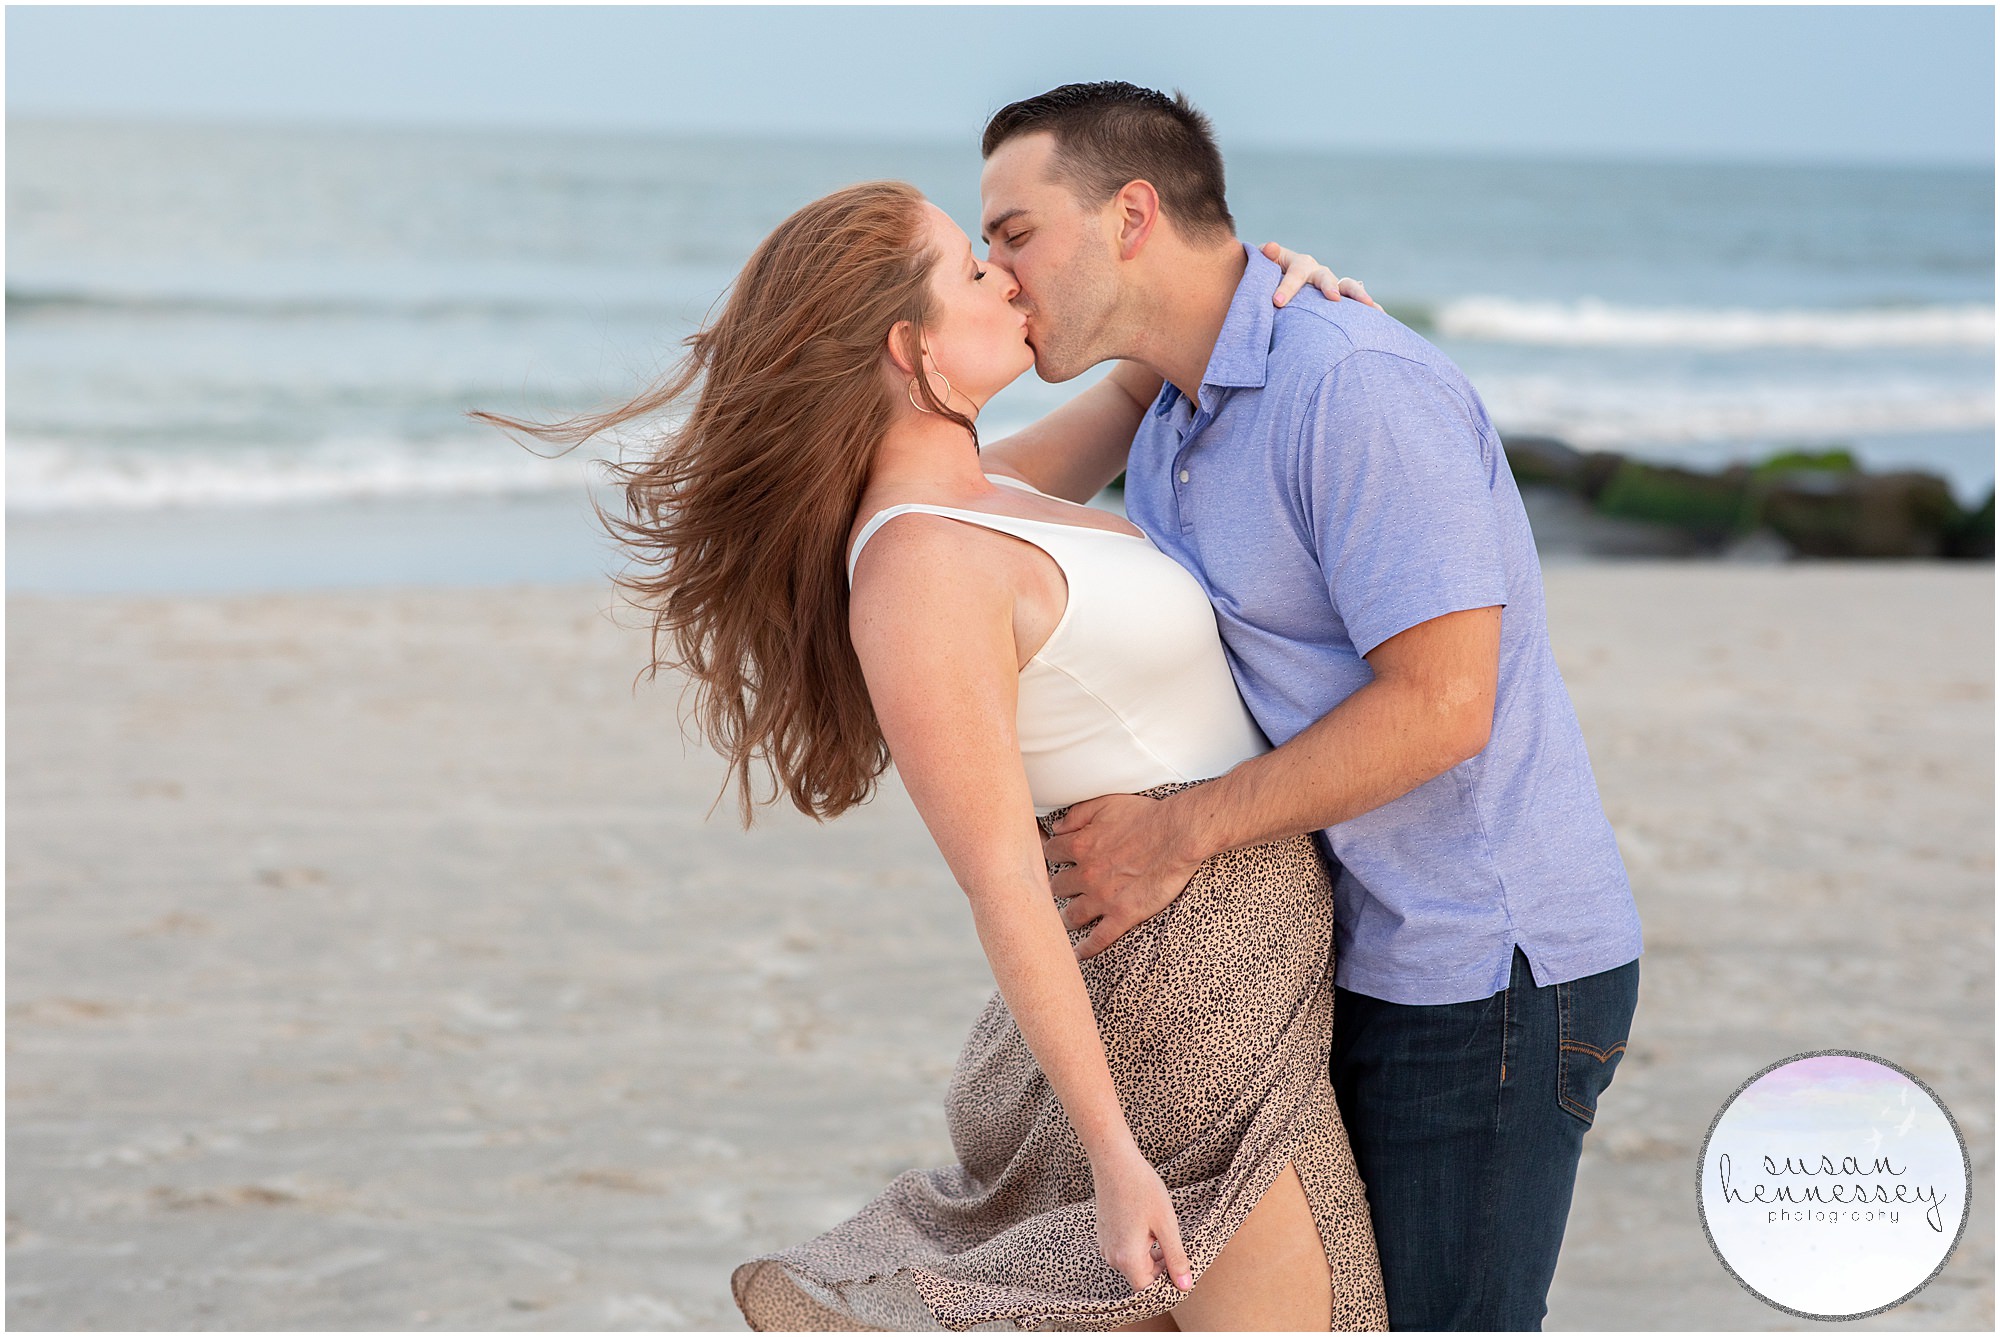 Engagement session after the proposal at the Jersey Shore in Stone Harbor